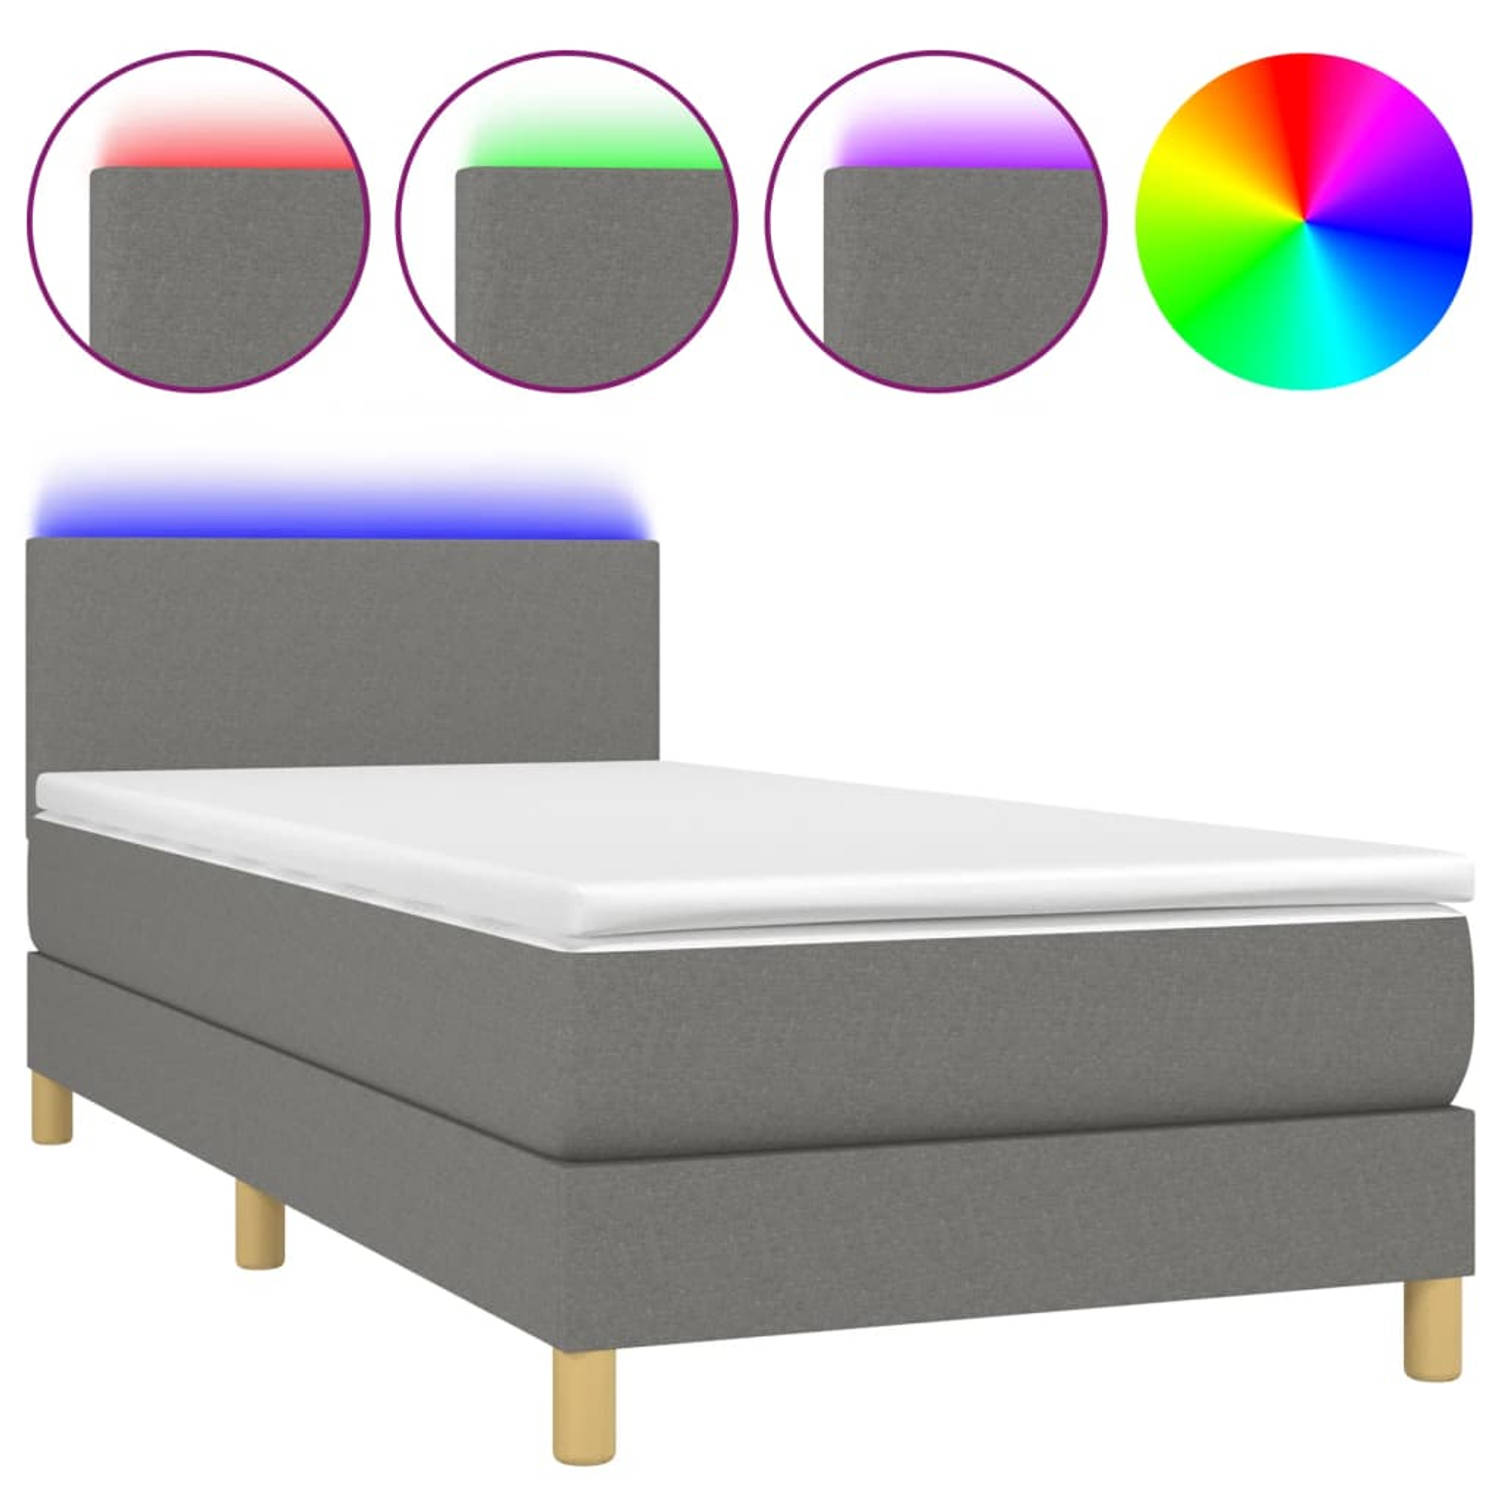 The Living Store Boxspring met matras en LED stof donkergrijs 100x200 cm - Boxspring - Boxsprings - Bed - Slaapmeubel - Boxspringbed - Boxspring Bed - Tweepersoonsbed - Bed Met Mat